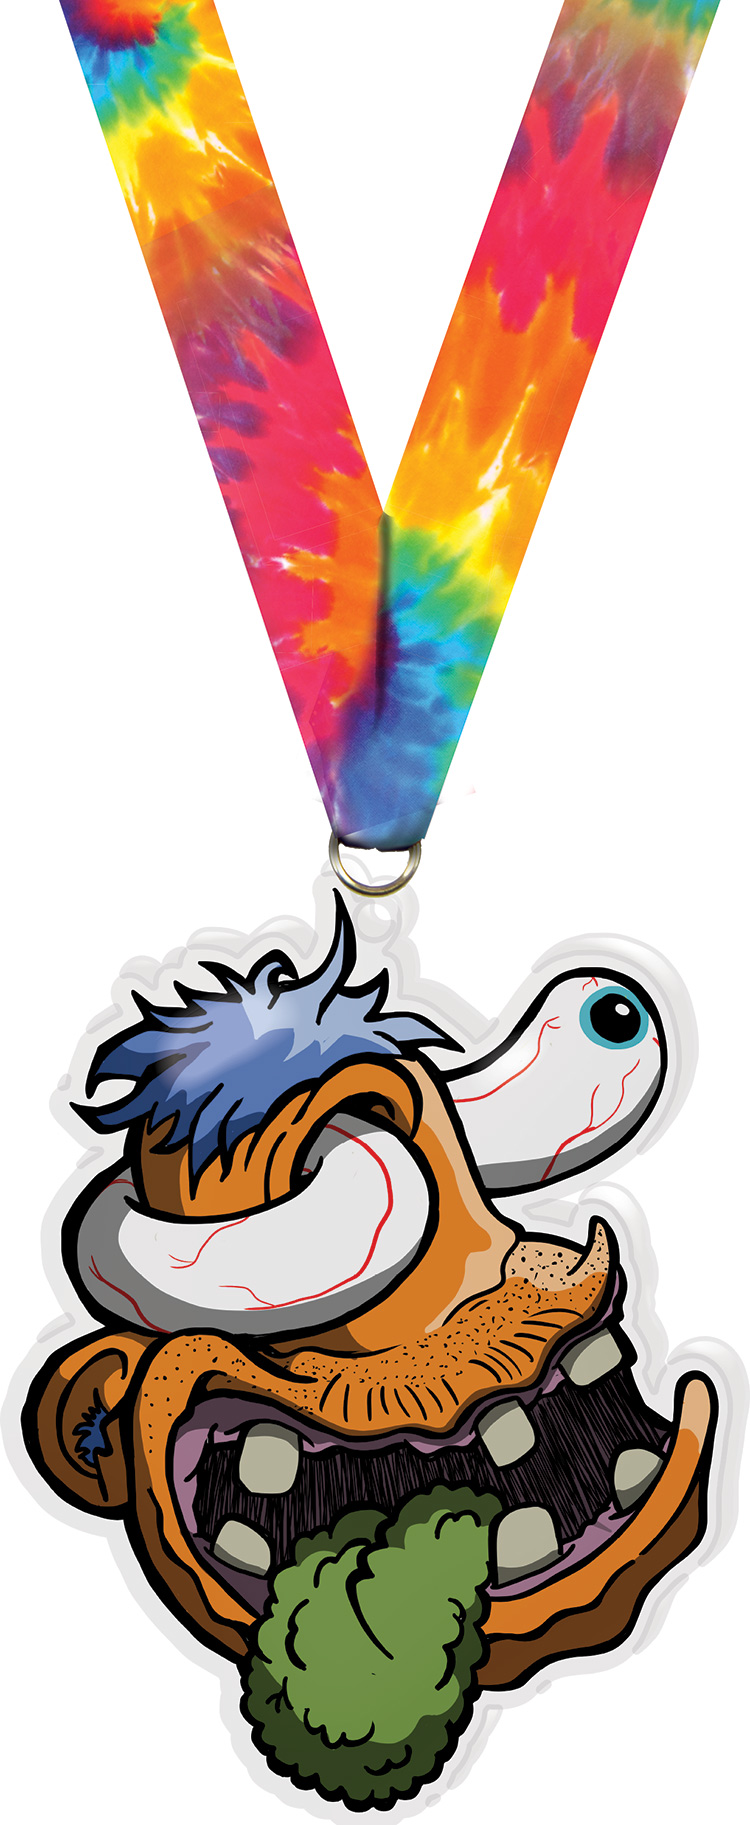 Exclusive TD Creepz Swirly Colorix-M Acrylic Medal - 5 inch